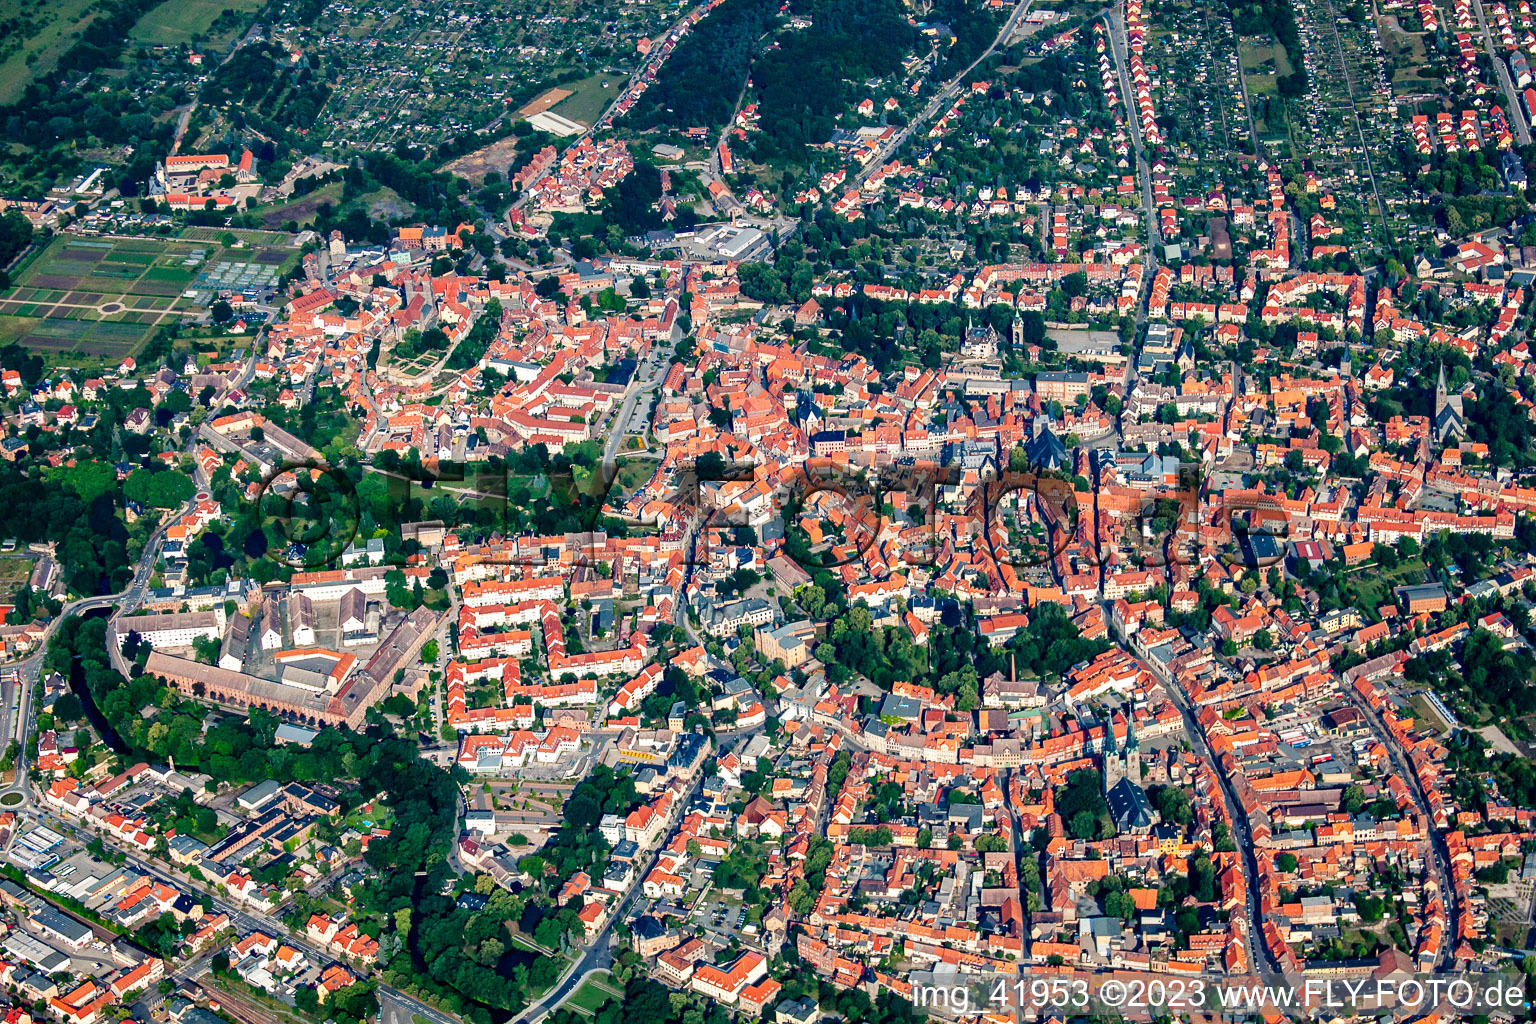 City view of the city area of in Quedlinburg in the state Saxony-Anhalt, Germany